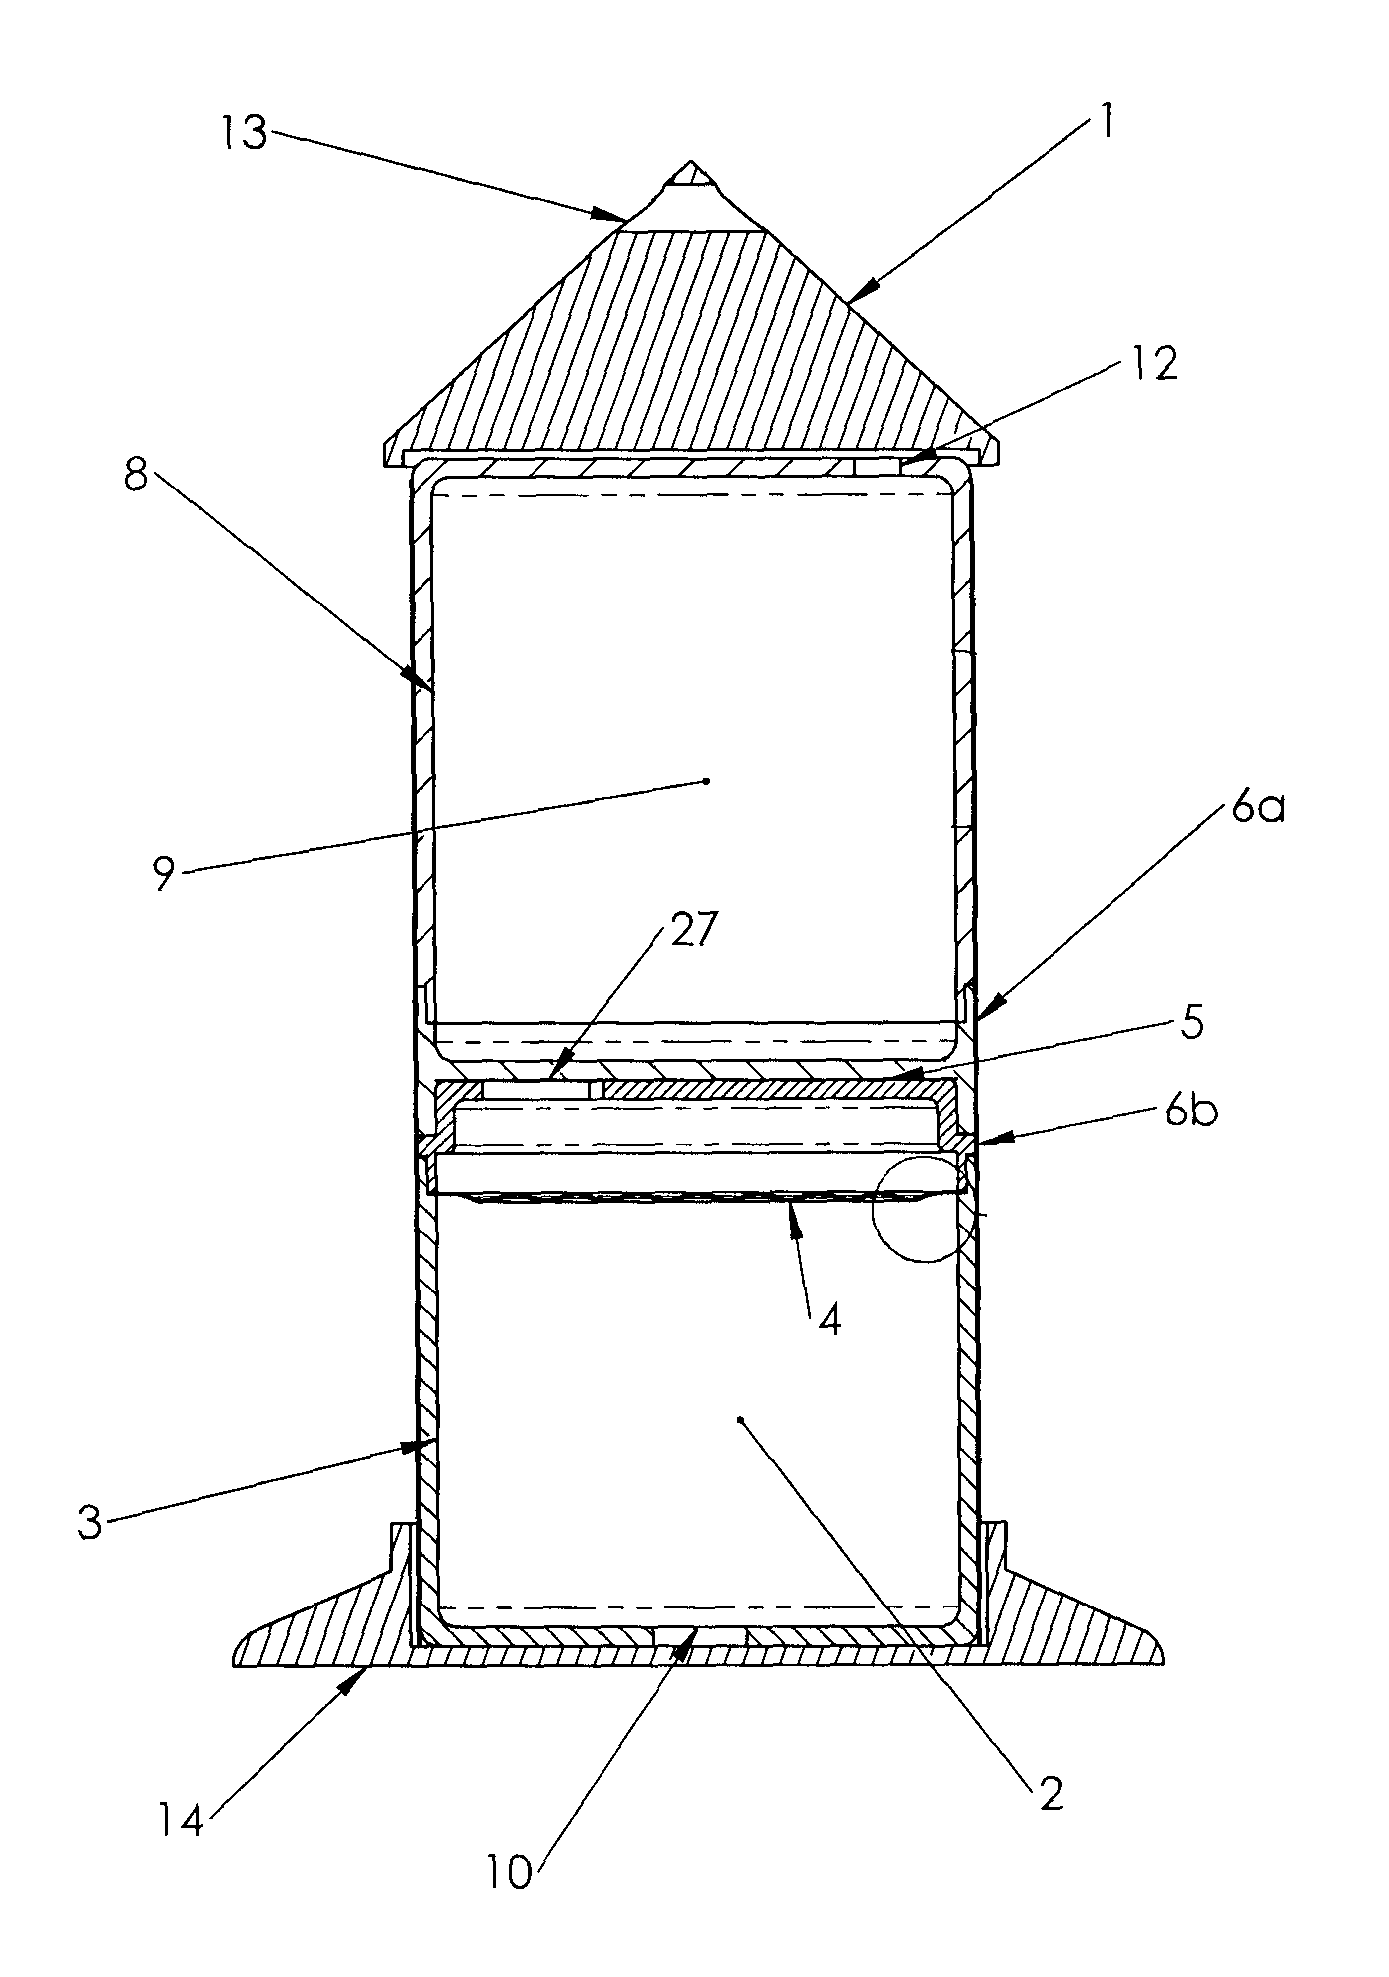 Apparatus and method for delivering beneficial liquids at steady rate